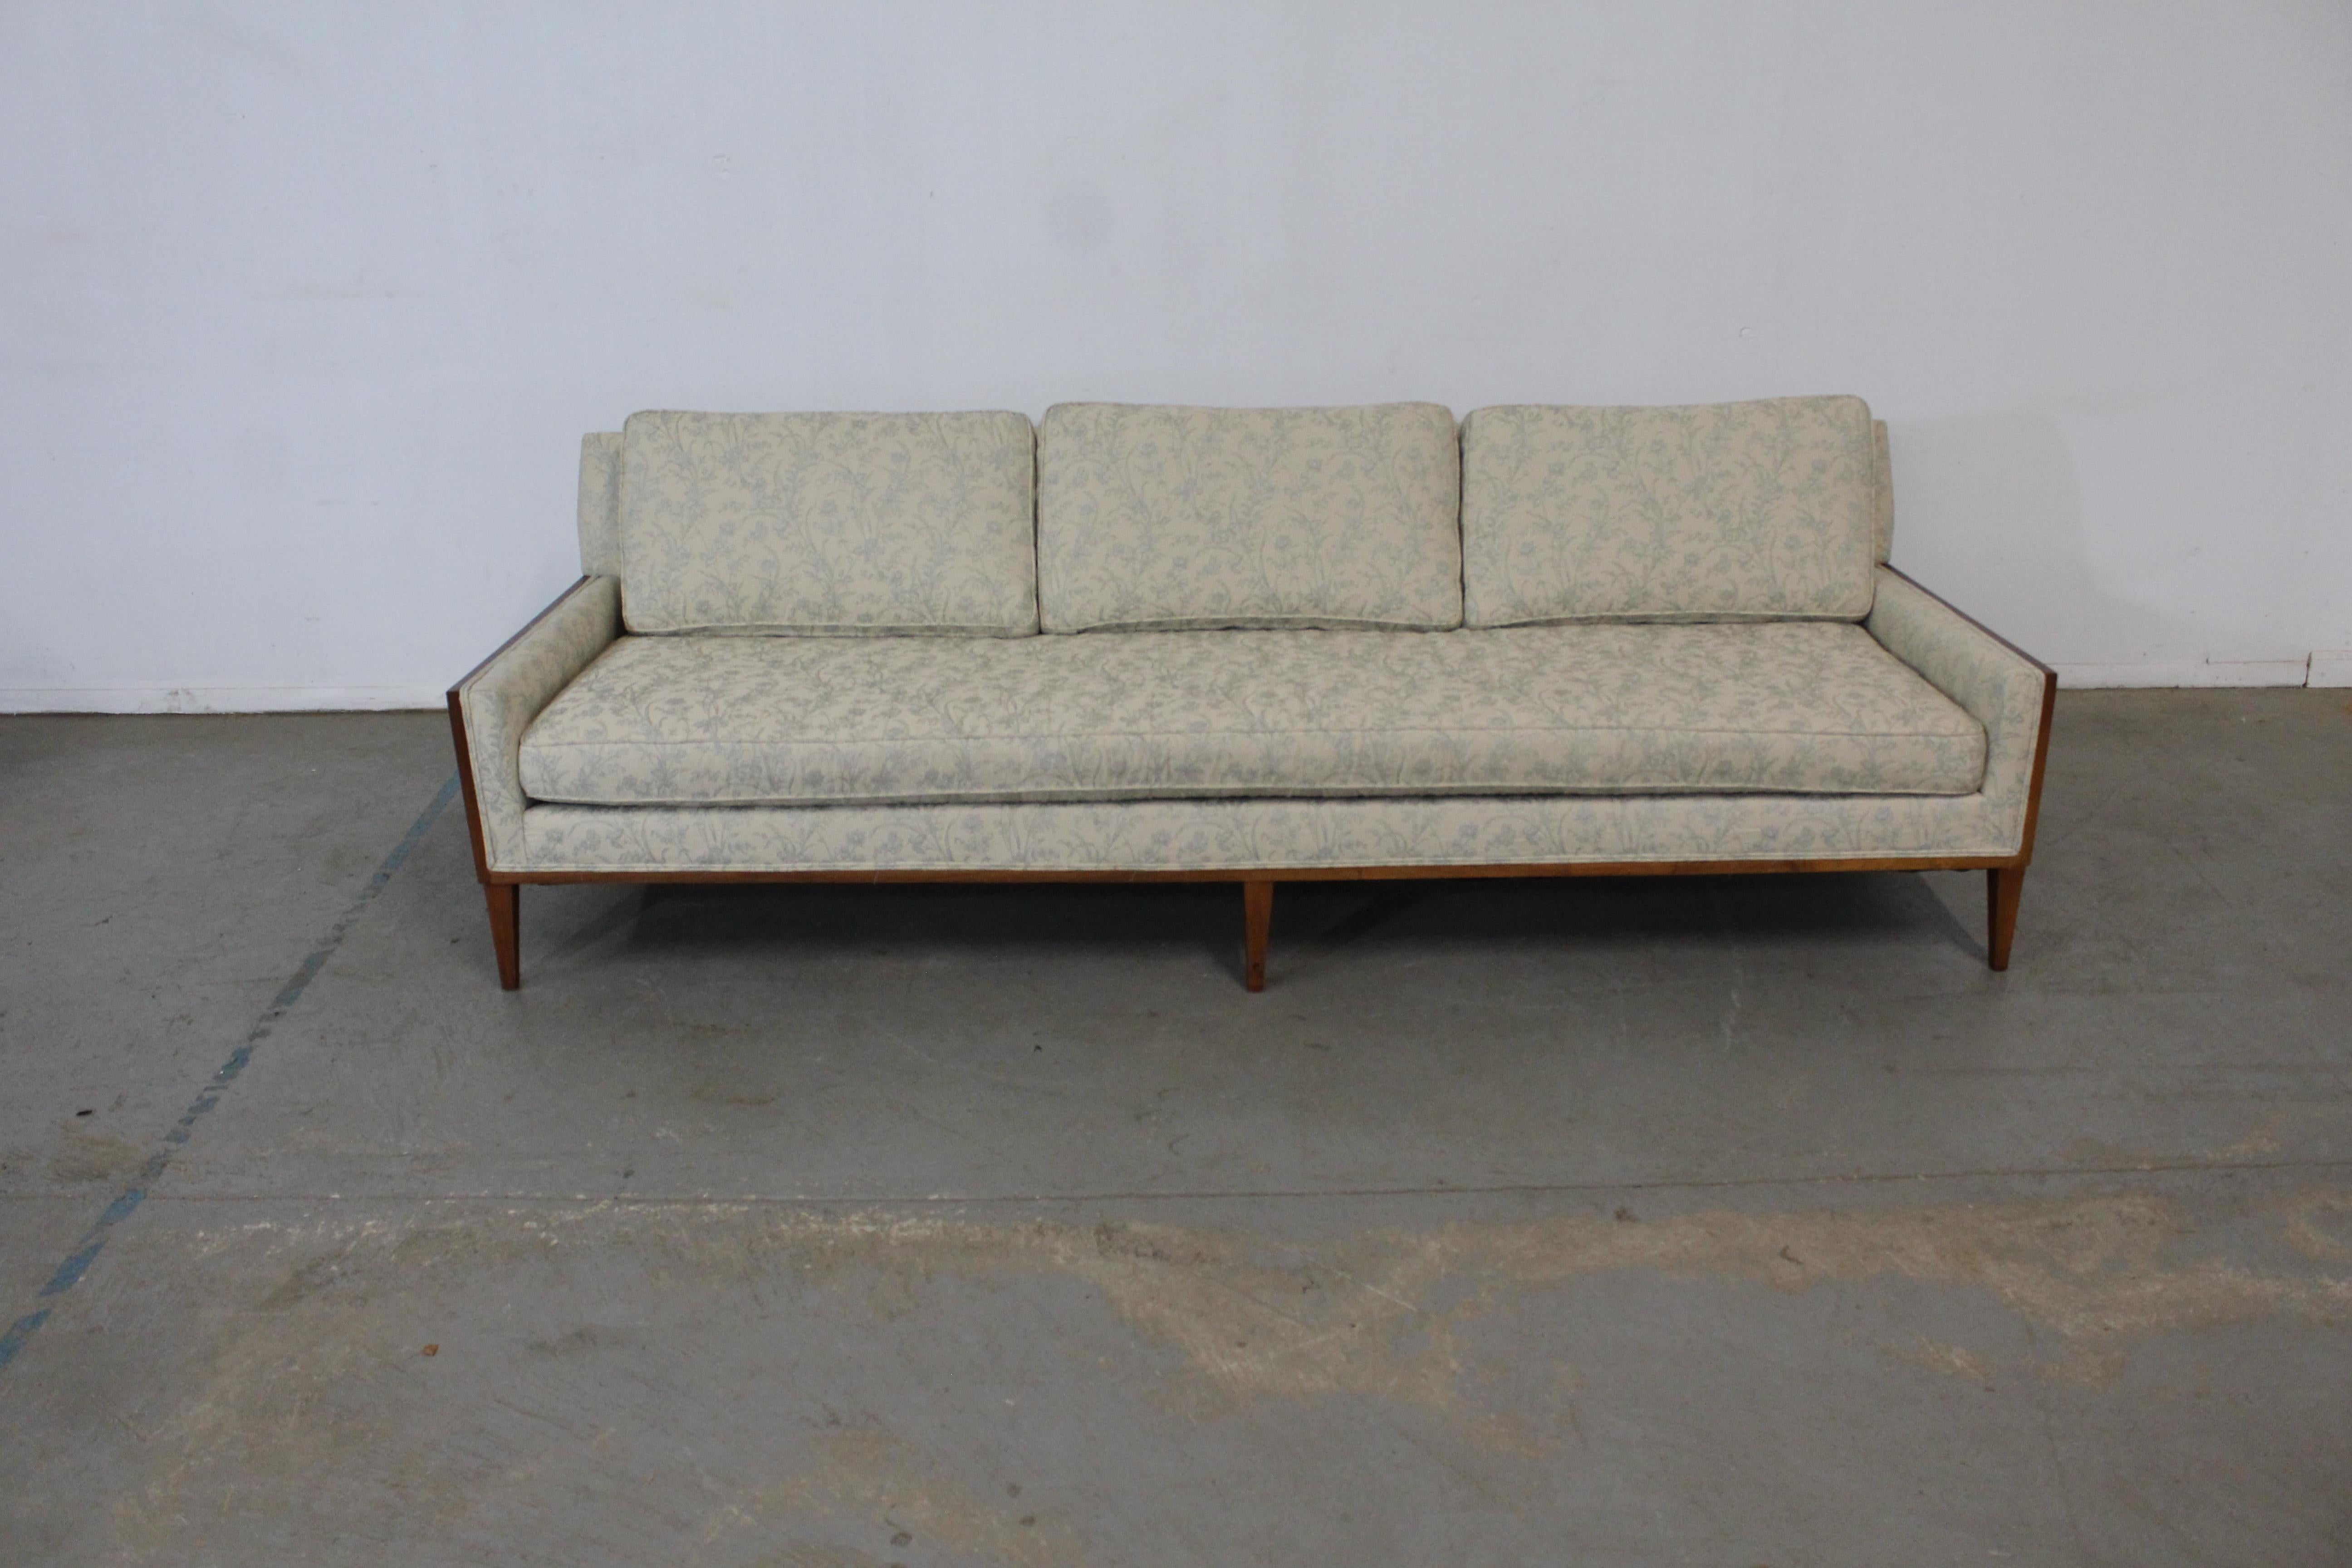 Mid-Century Elongated Low Profile Walnut Trimmed sofa on Tapered legs
Offered is an unrestored mid-century modern sofa. This sofa is very cool and has nice lines. The design screams 1960's and gives off a total James Bond era vibe. Sleek would be a